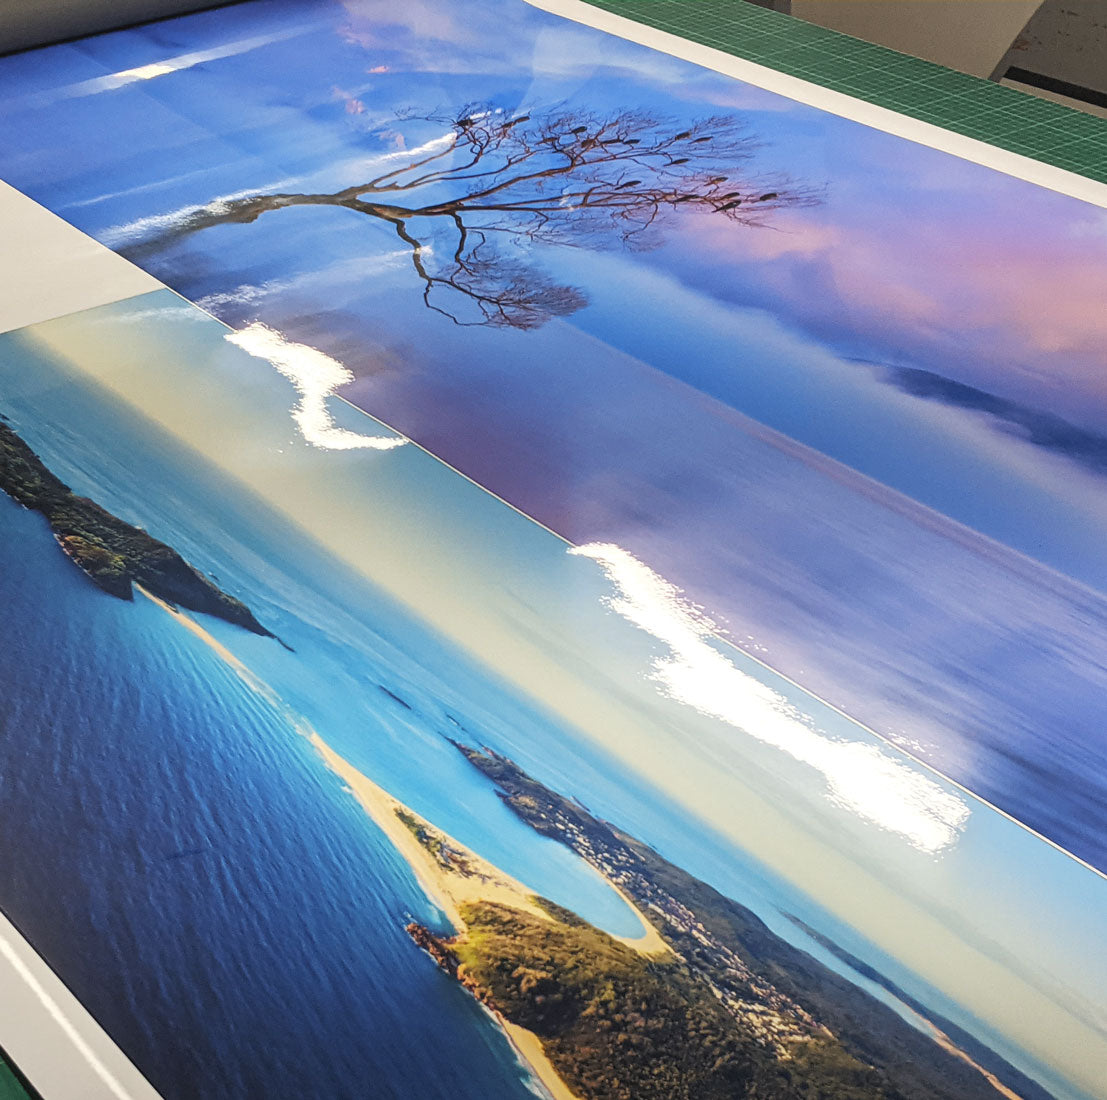 Metallic gloss prints for face mounting to Perspex 'glass'